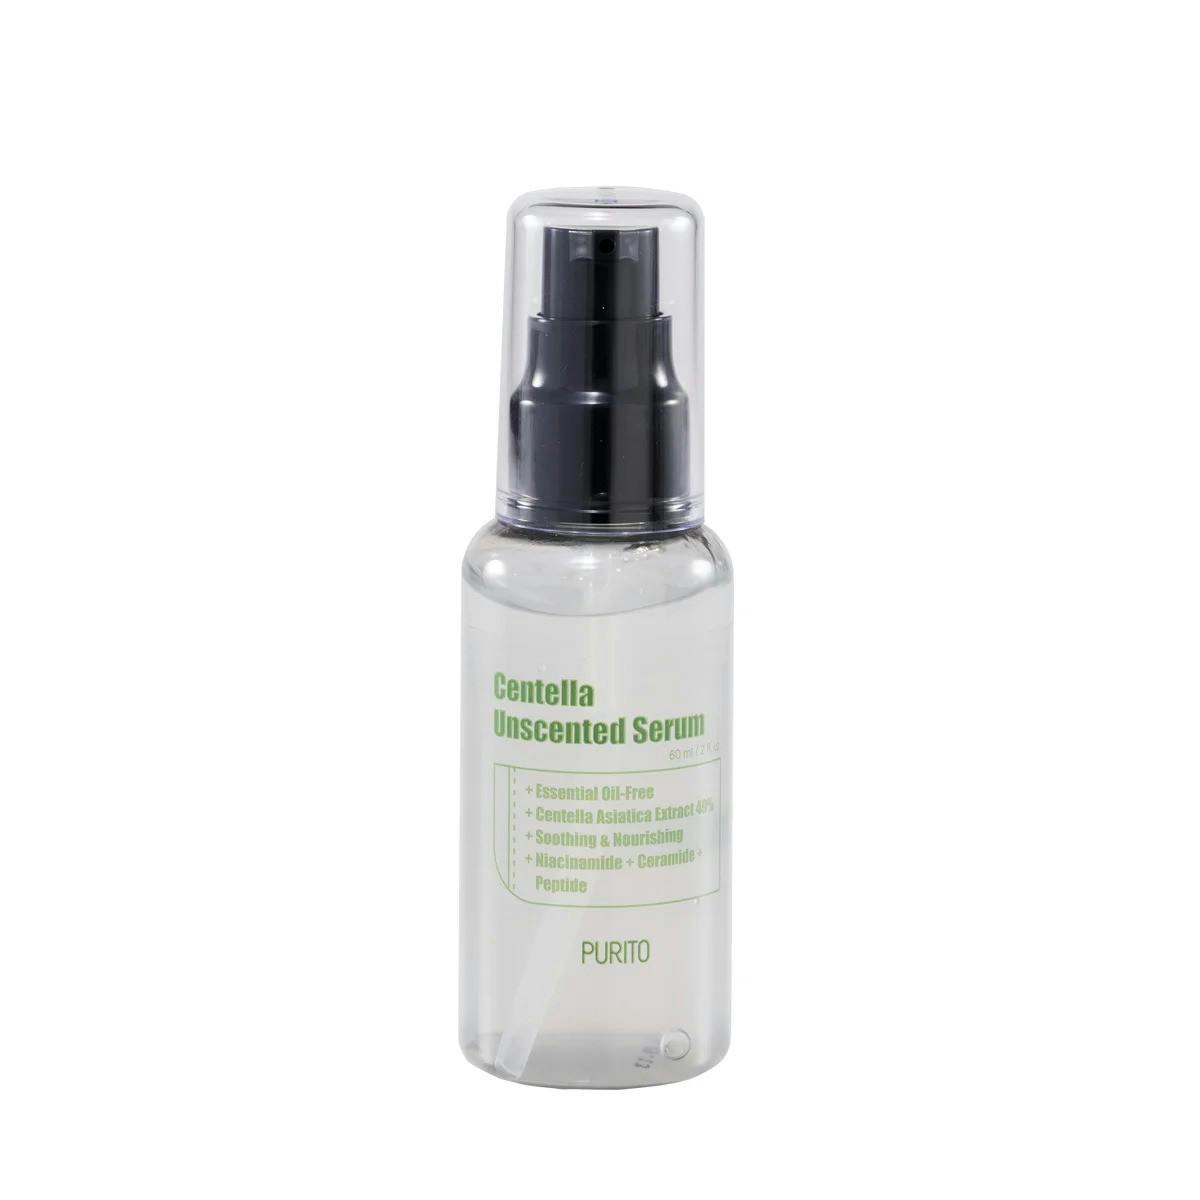 HYALURONIC ACID SERUM: Revealing the Secrets to a Hydrated, Youthful Complexion